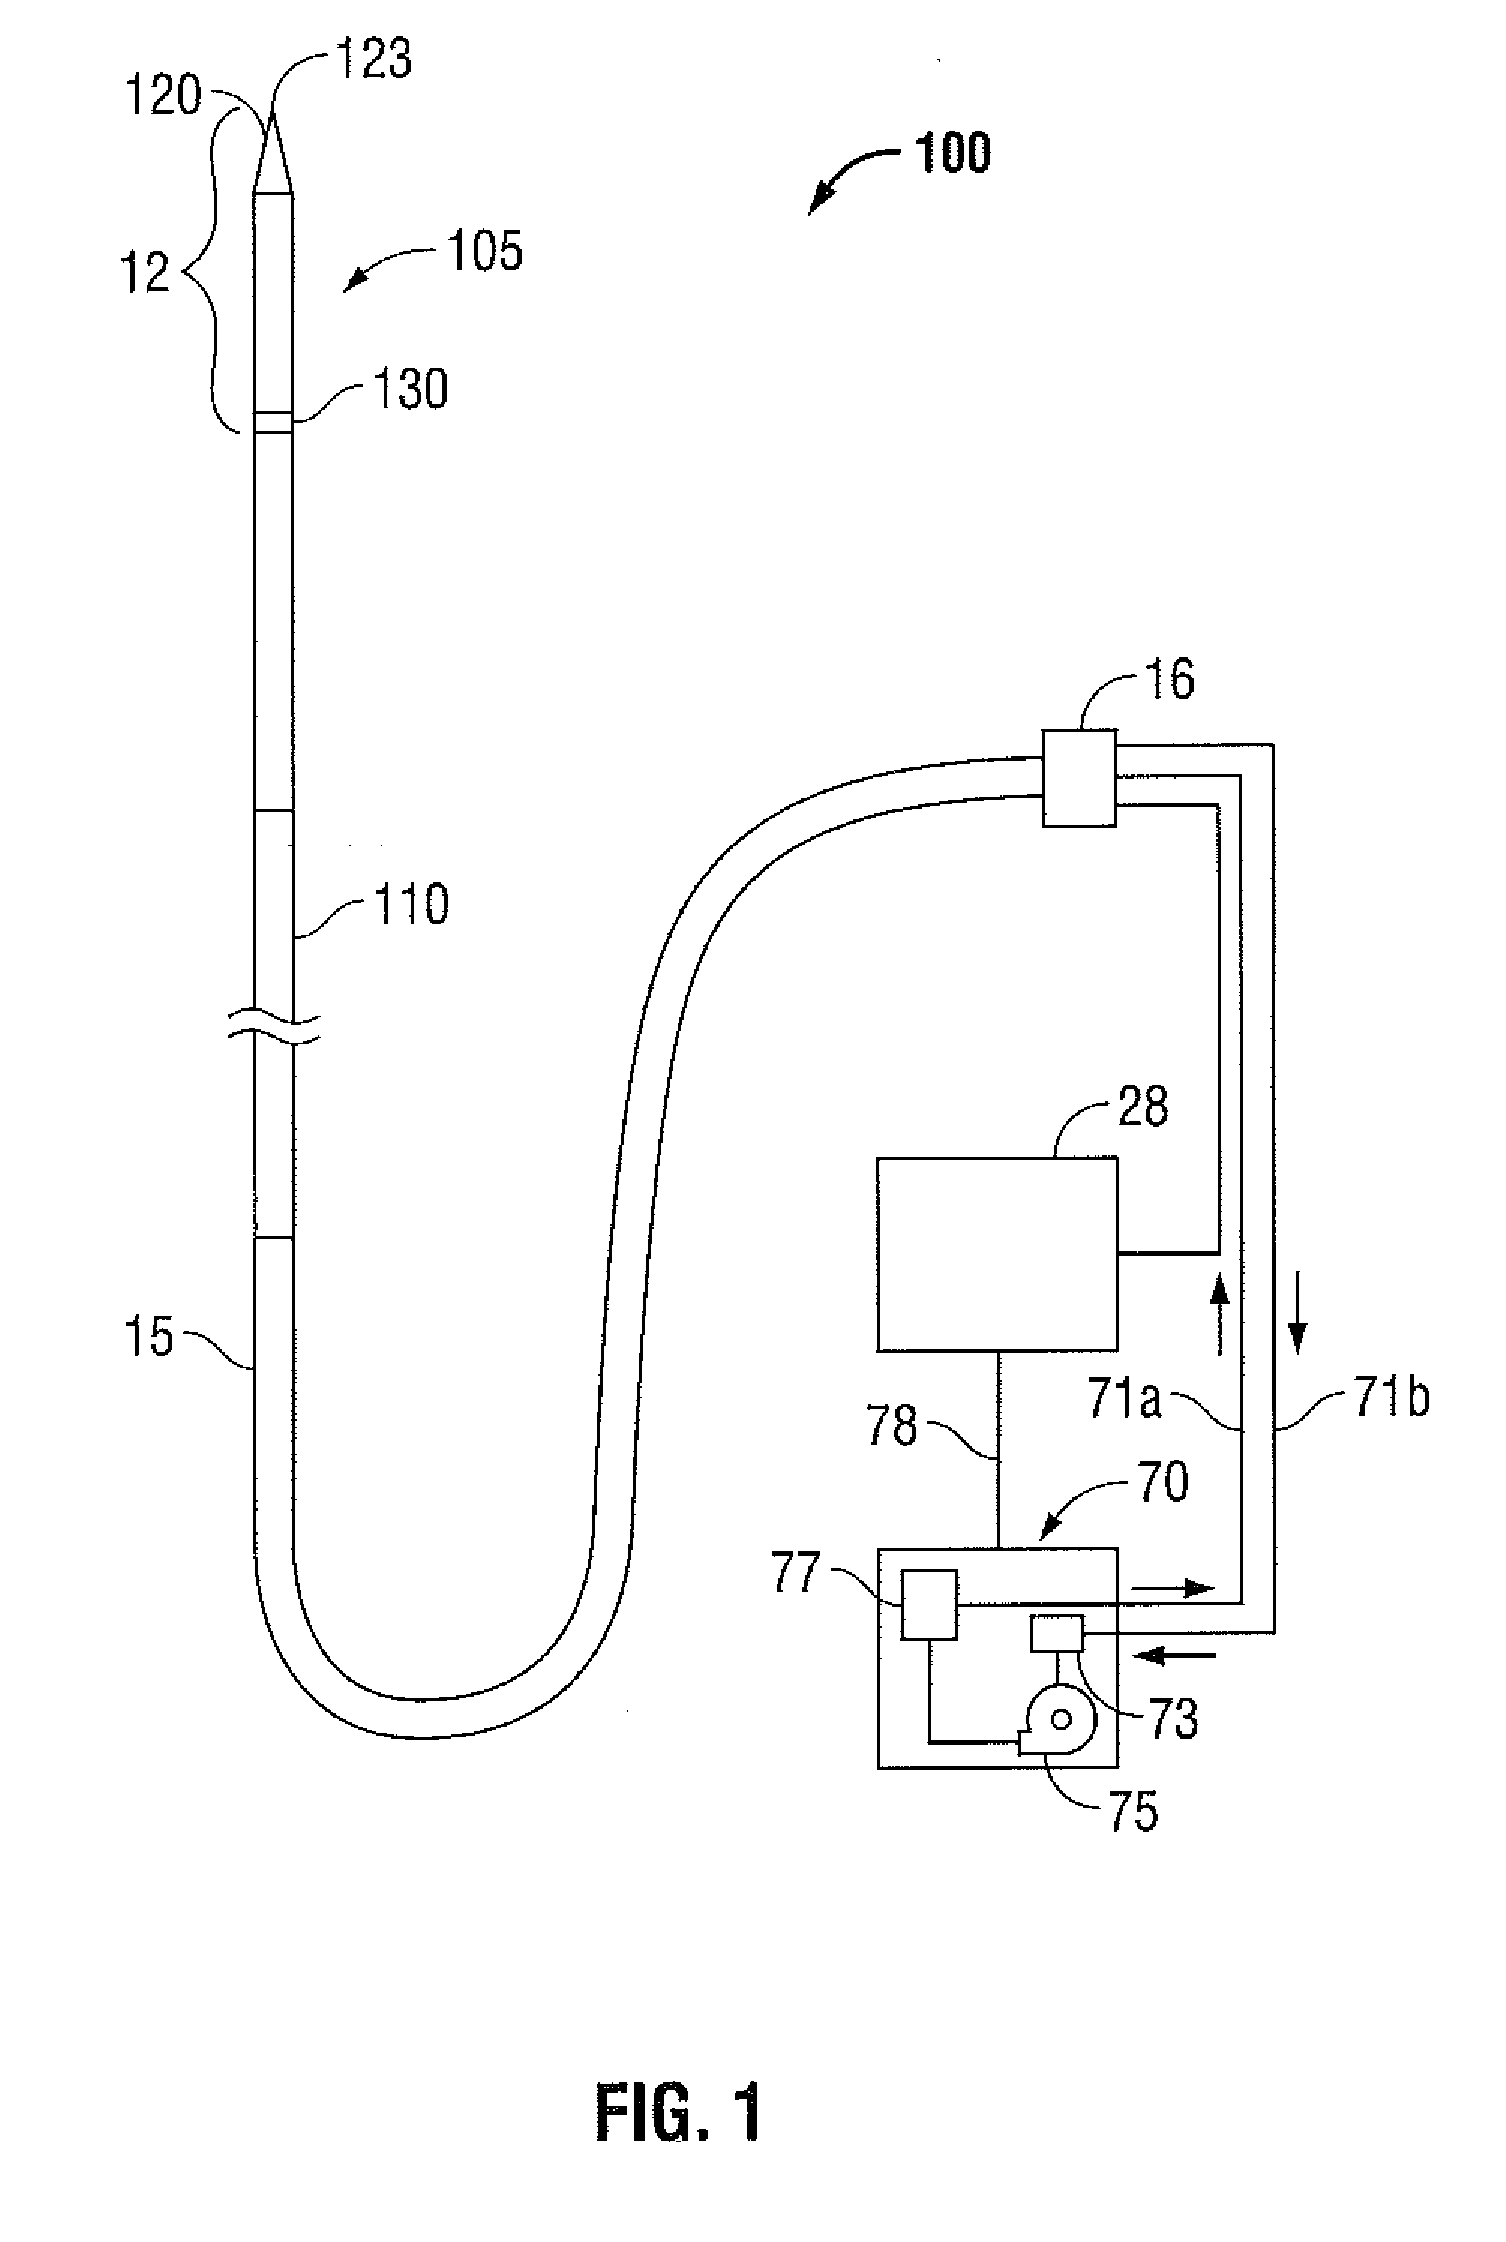 Fluid Cooled Choke Dielectric and Coaxial Cable Dielectric